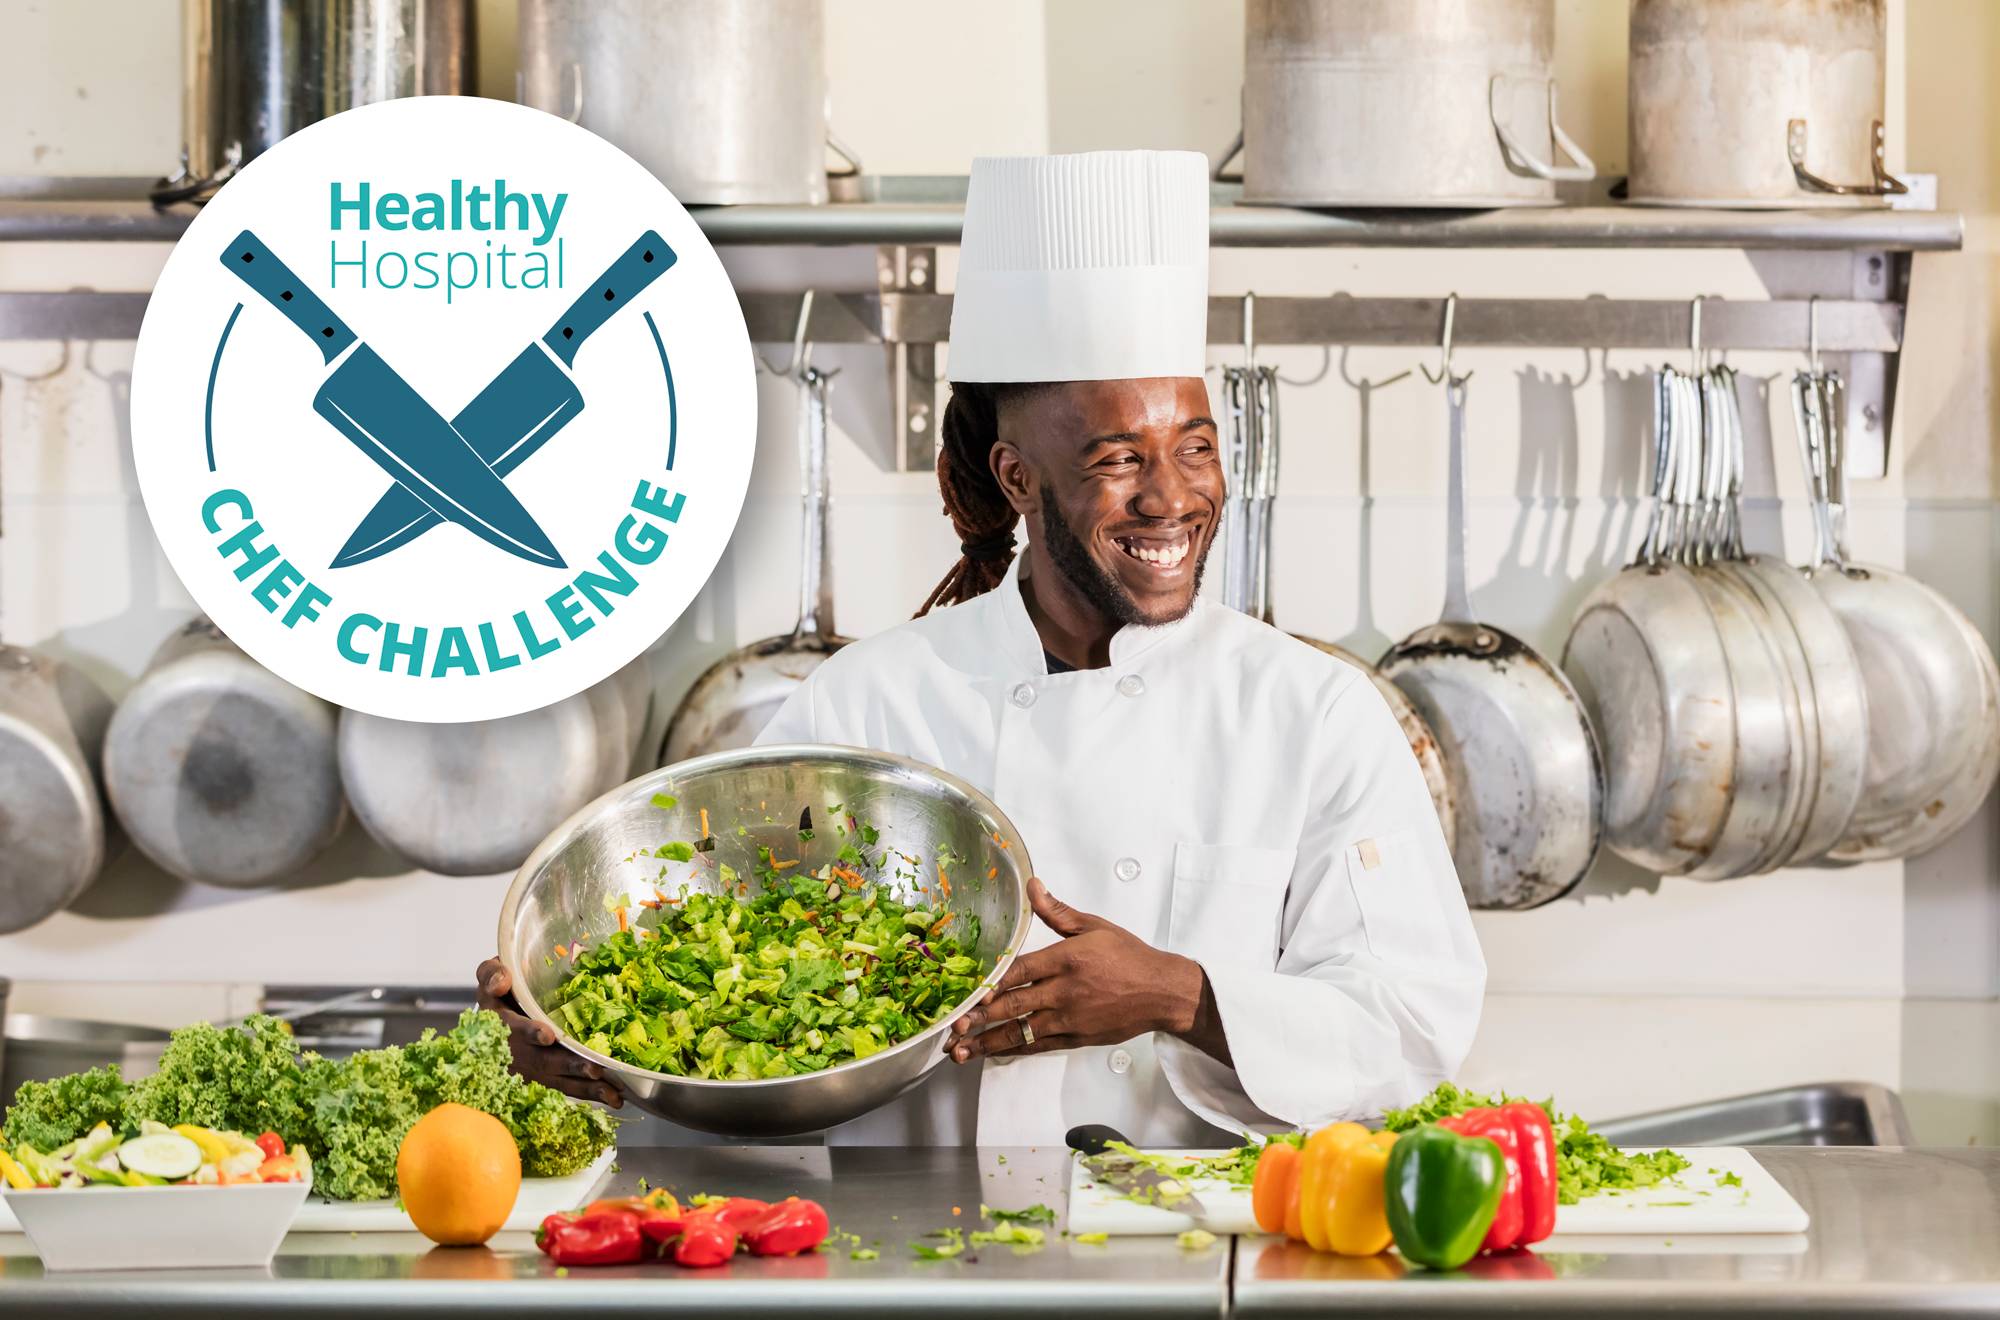 Chefs’ Challenge Will Be a Centerpiece of the International Conference